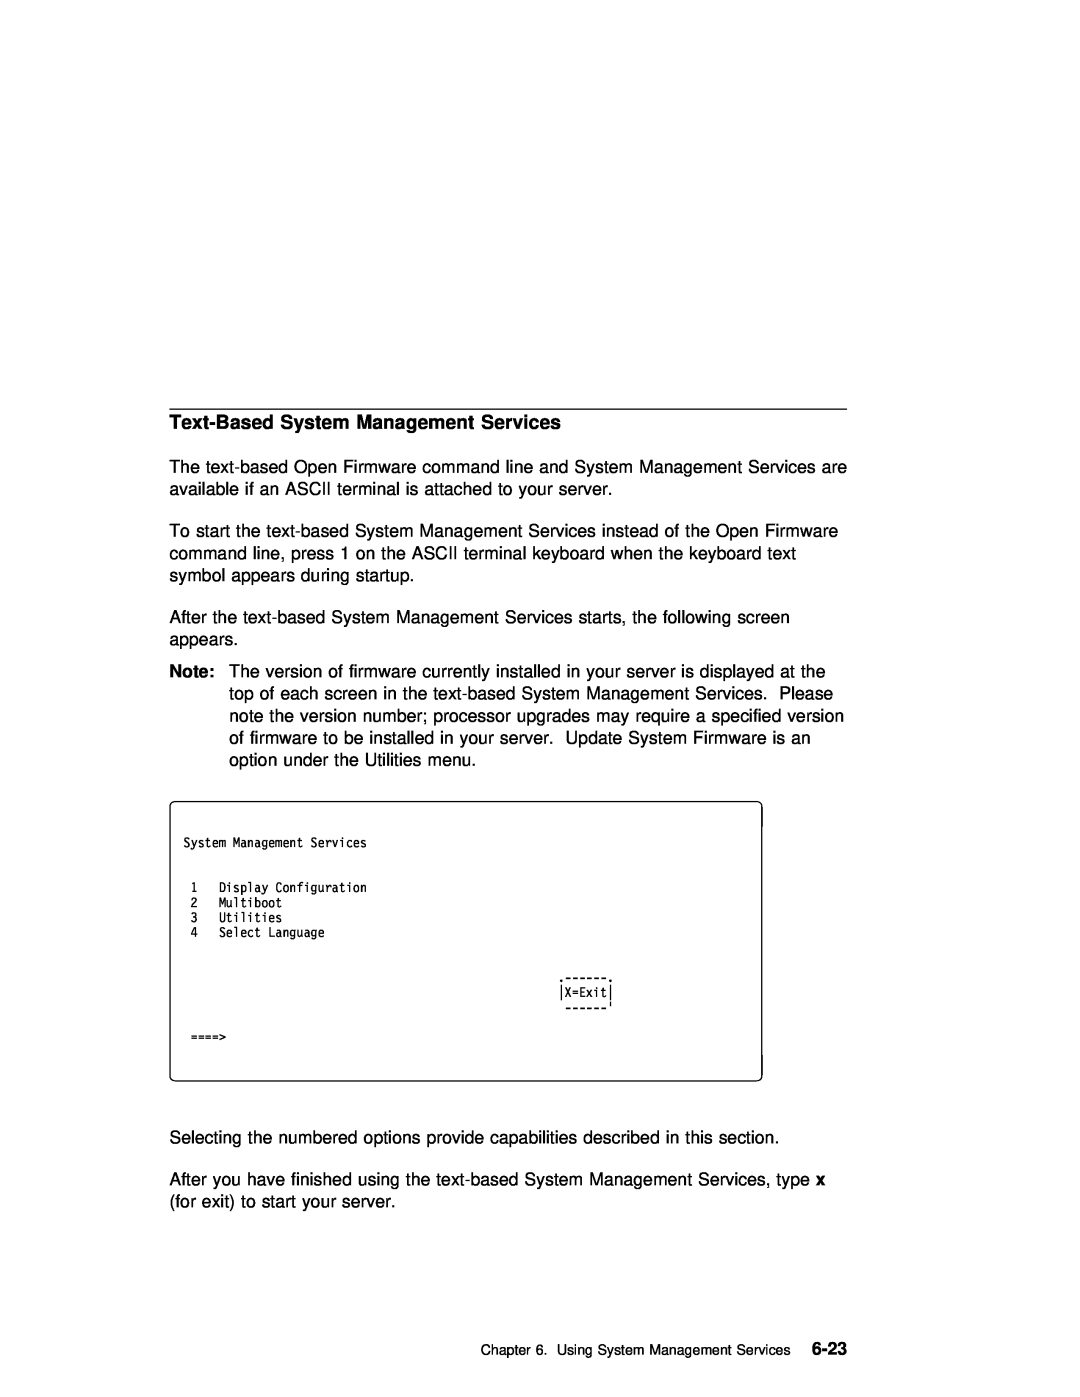 IBM B50 manual Text-Based System Management Services, 6-23 